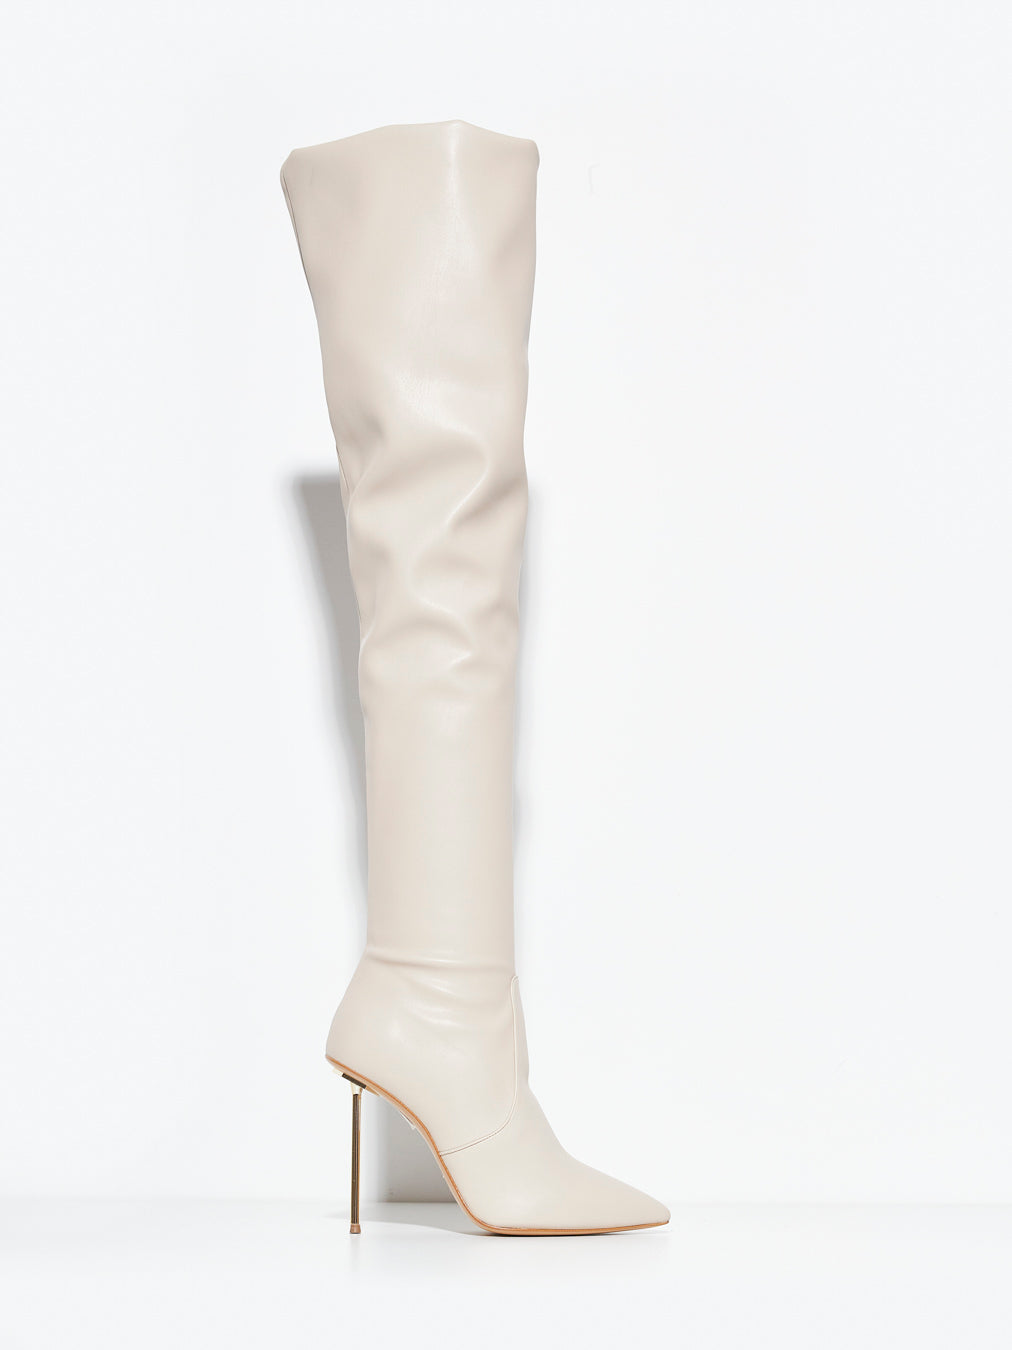 Wo Milano long boot in cream leather